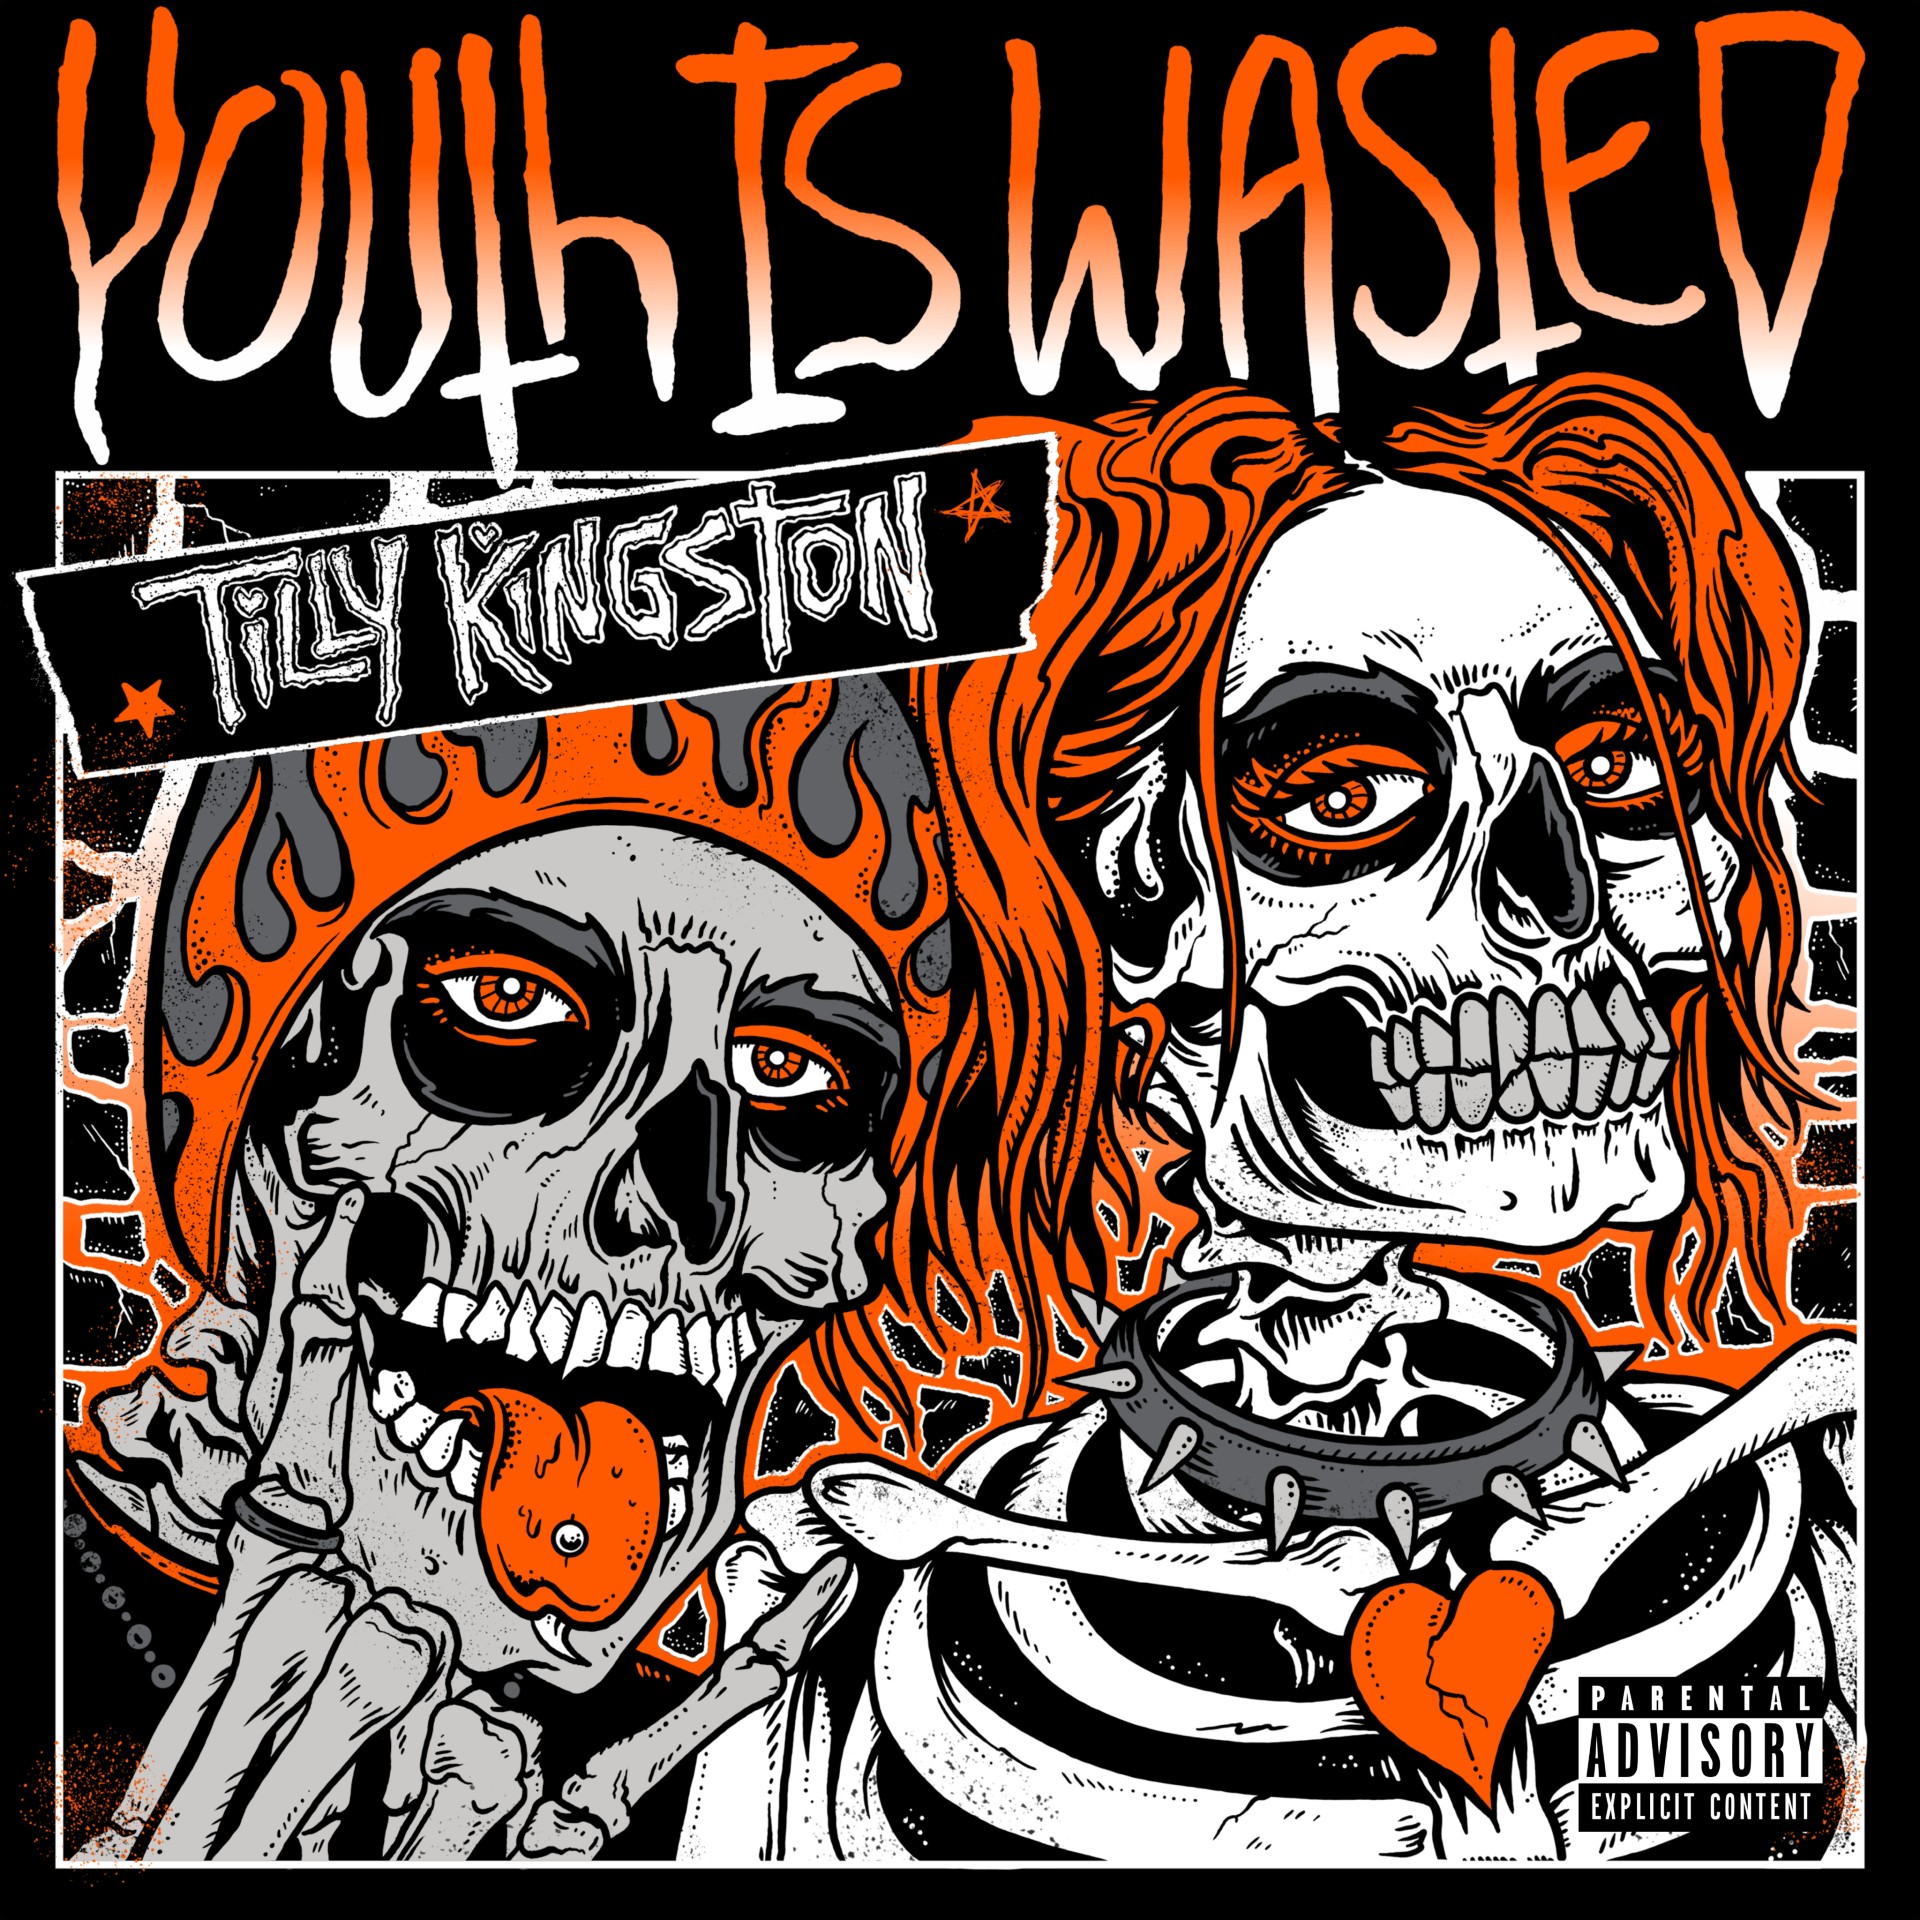 Tilly Kingston “Youth Is Wasted” single artwork